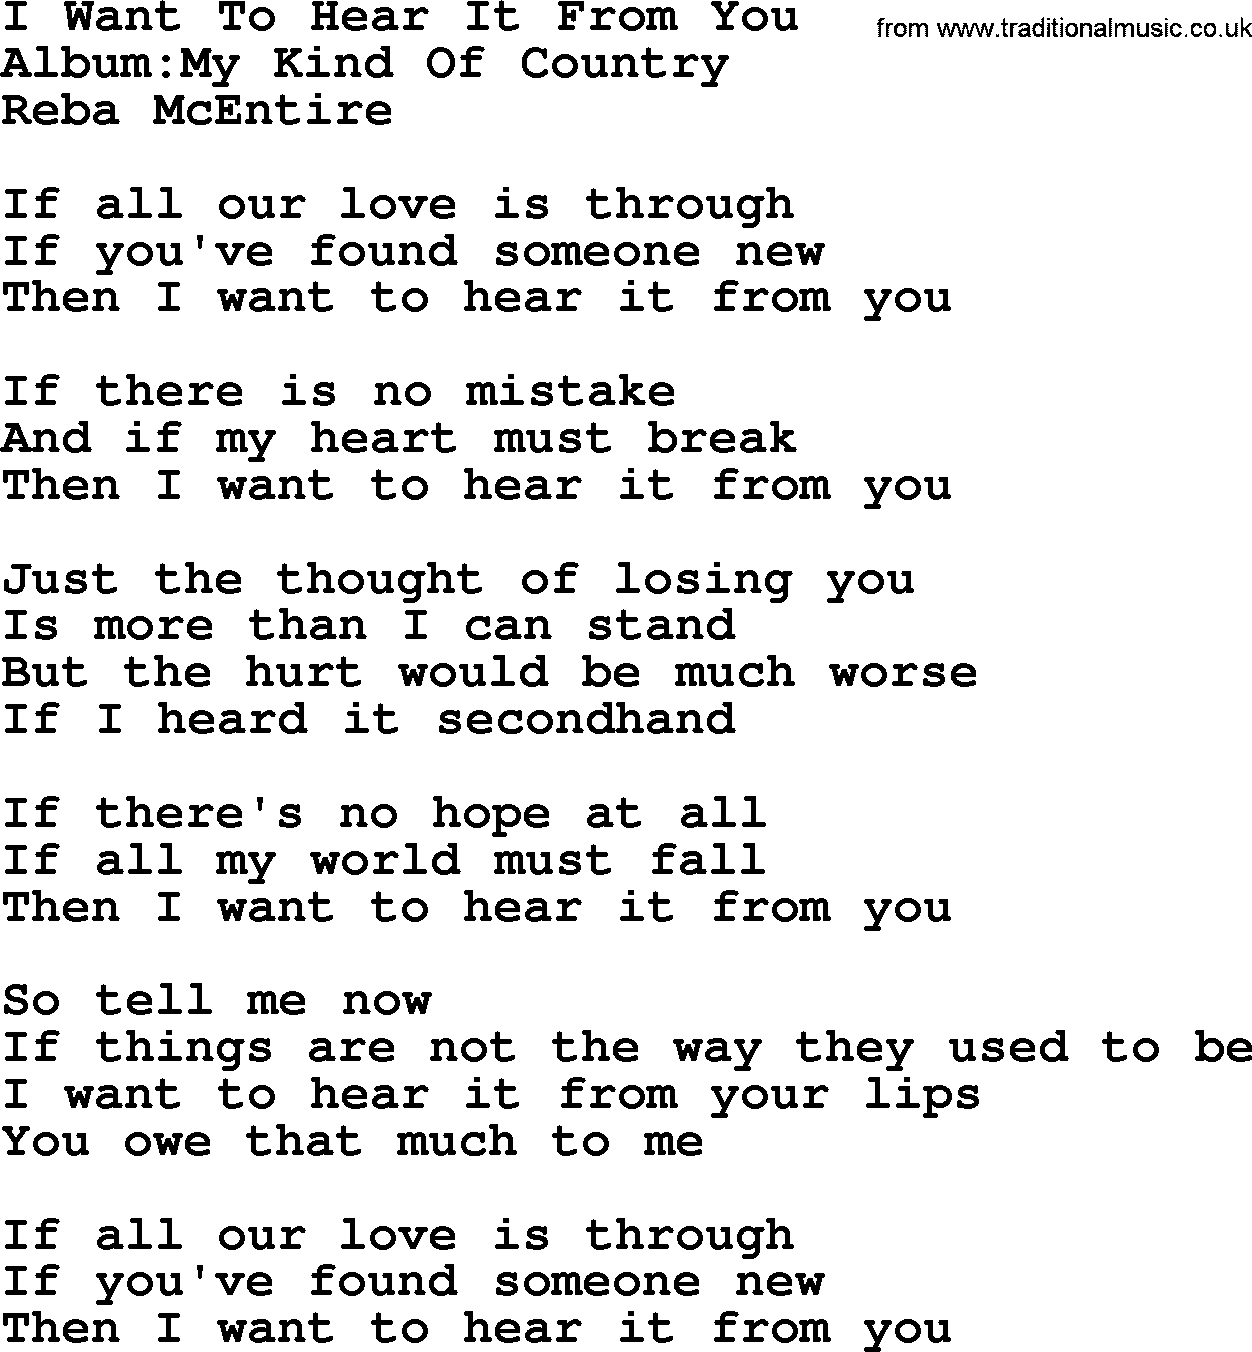 Reba McEntire song: I Want To Hear It From You lyrics